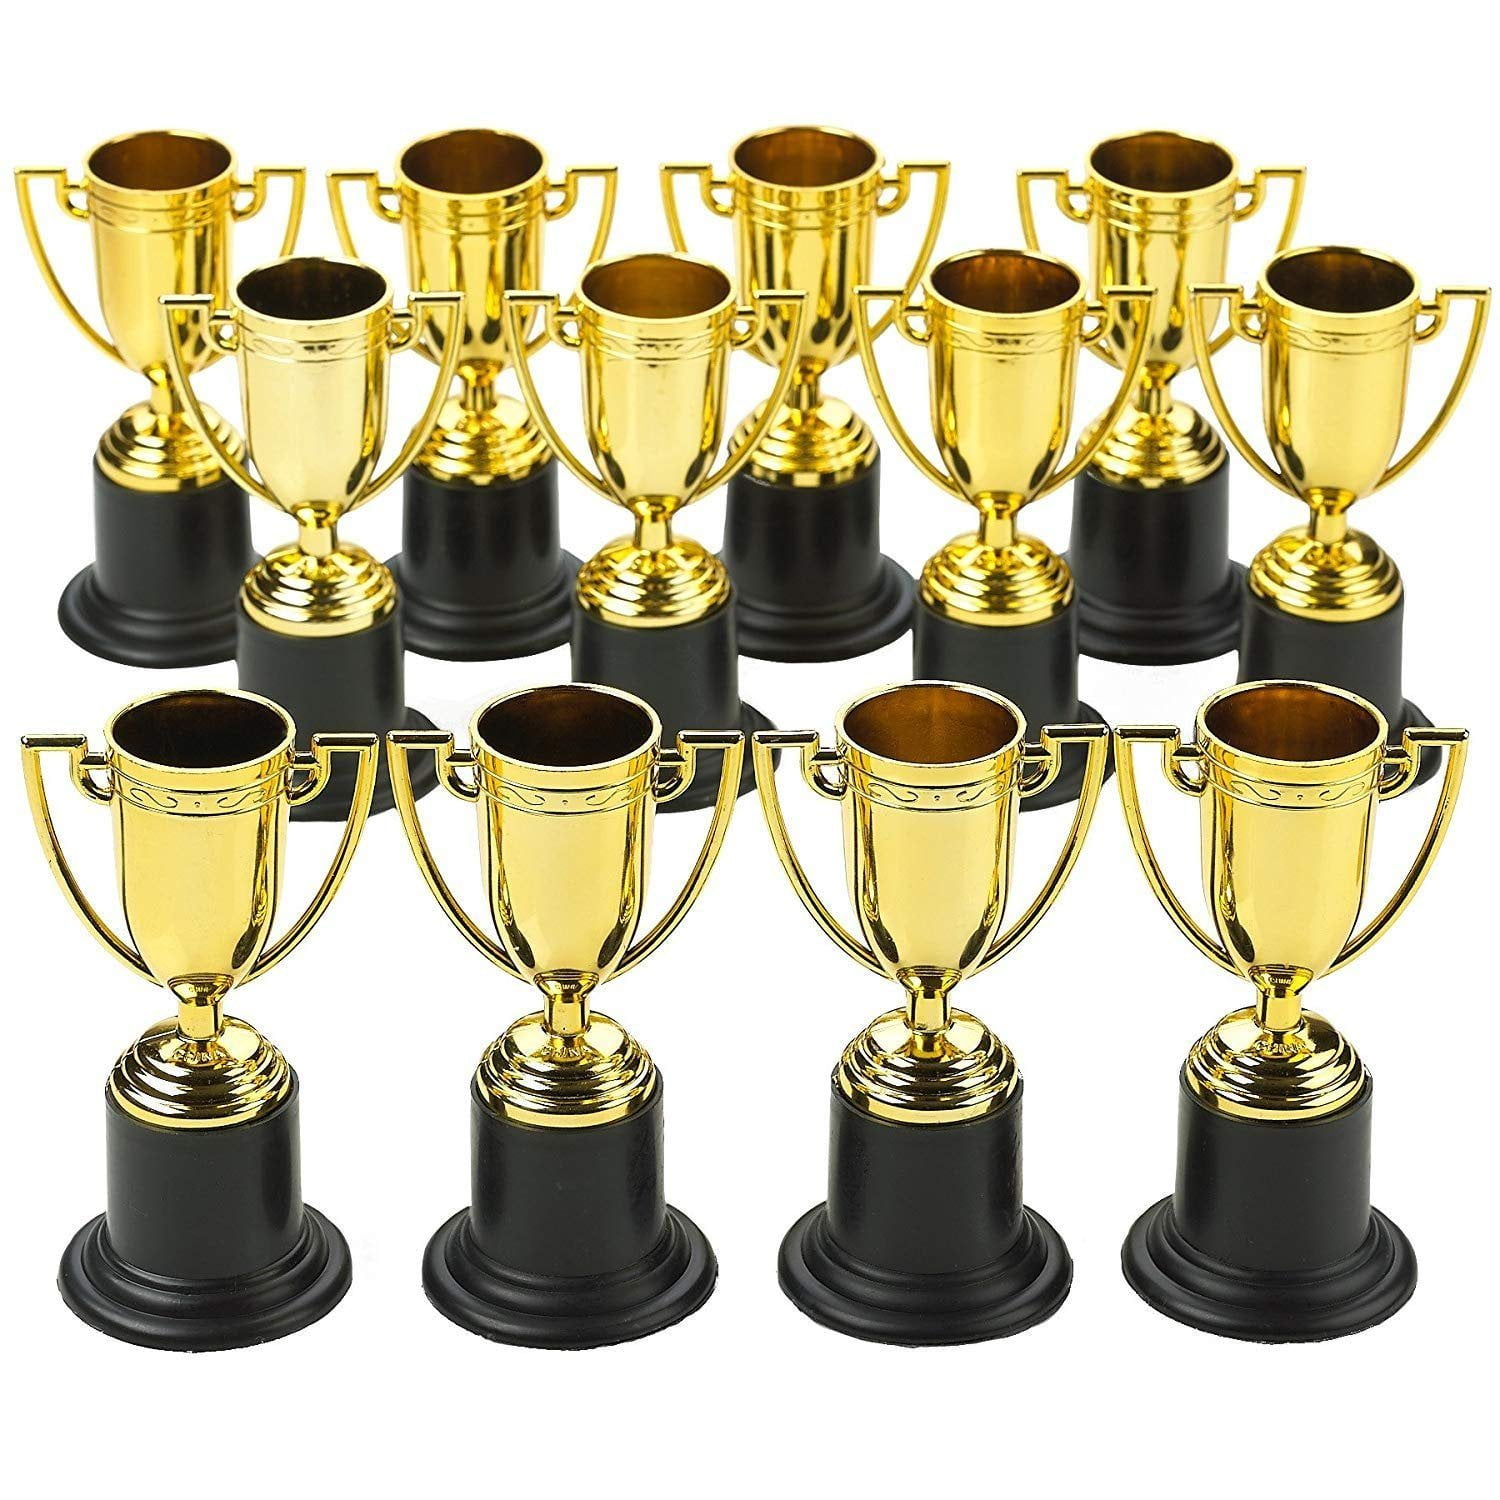 5 Inch , Plastic Golden Trophies For Party Favors, Kids Classroom School Rewards, Competition Or Celebration Events Awards Props, Sports Tournament Winning Prizes 24 Pack Mini Gold Award Trophy Cups 